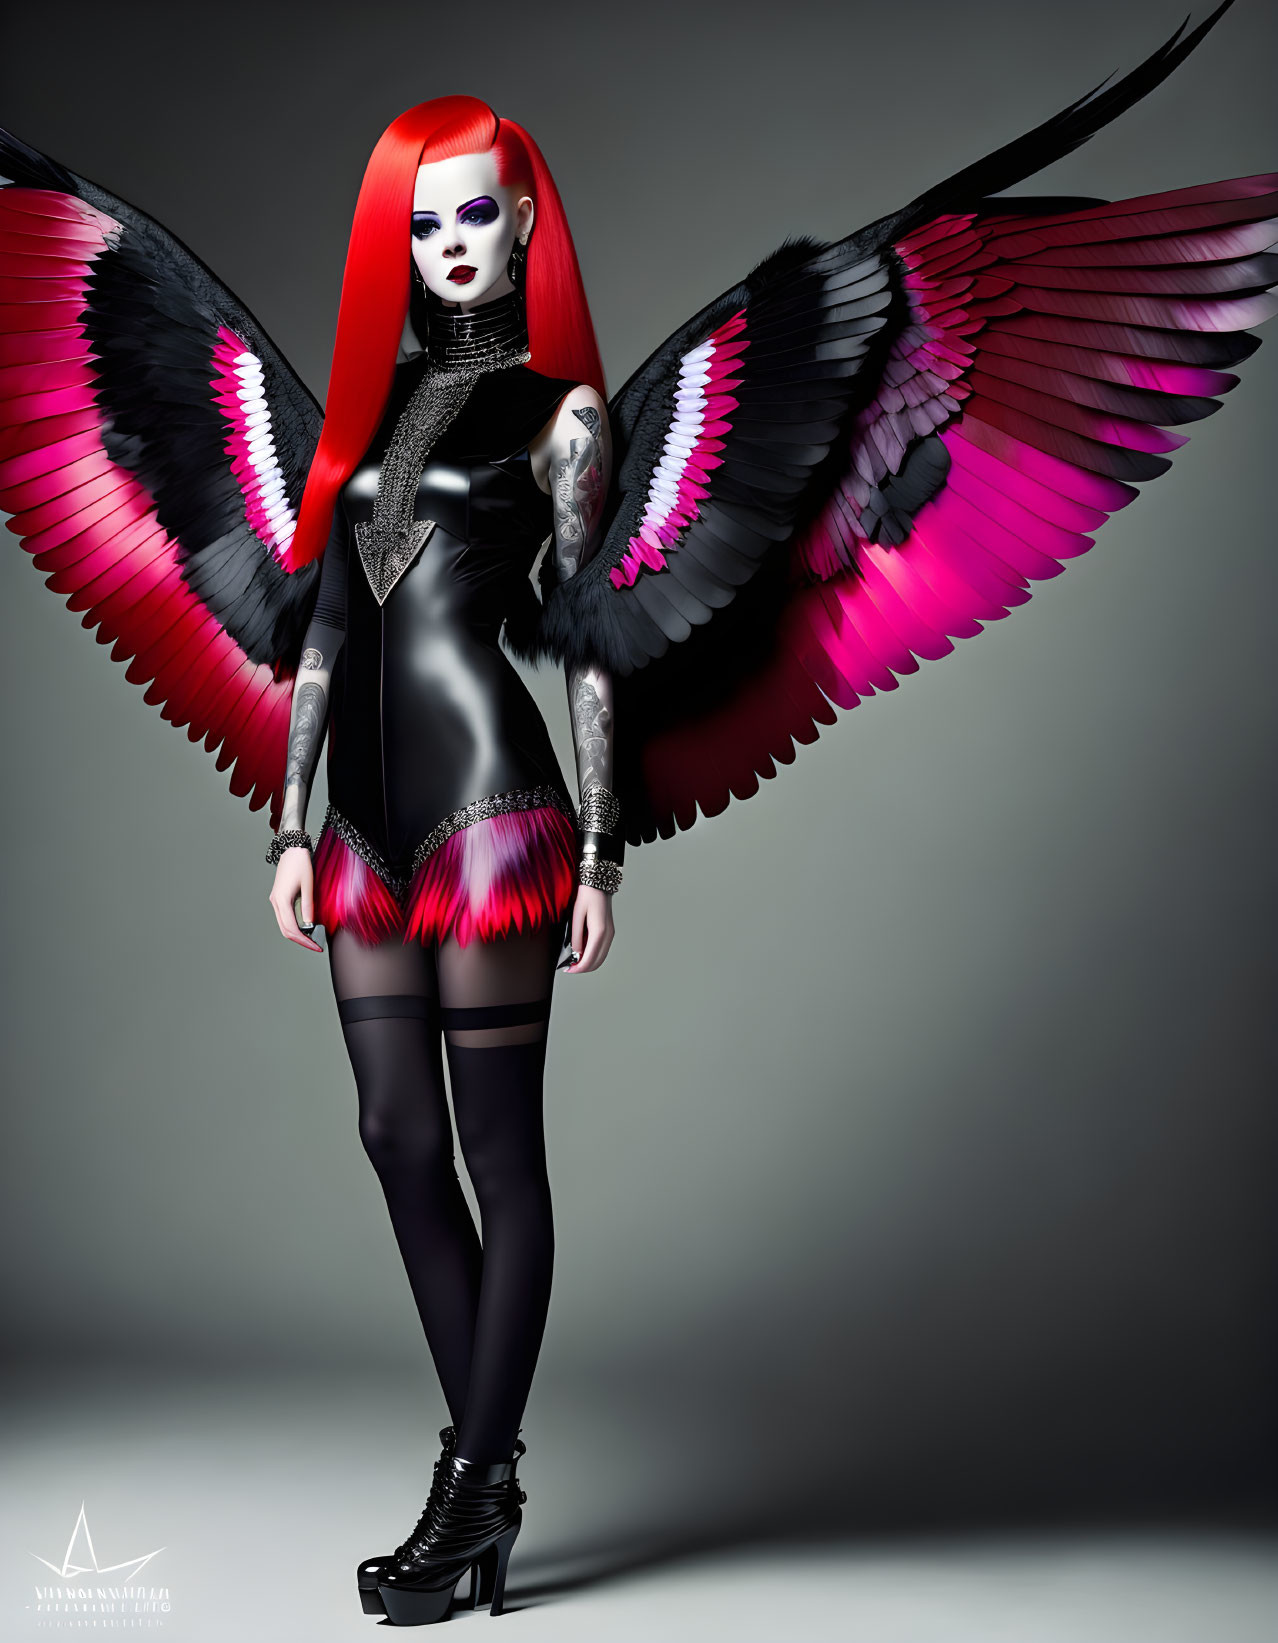 Woman with Red and Black Hair and Bird Wings in Dark Outfit